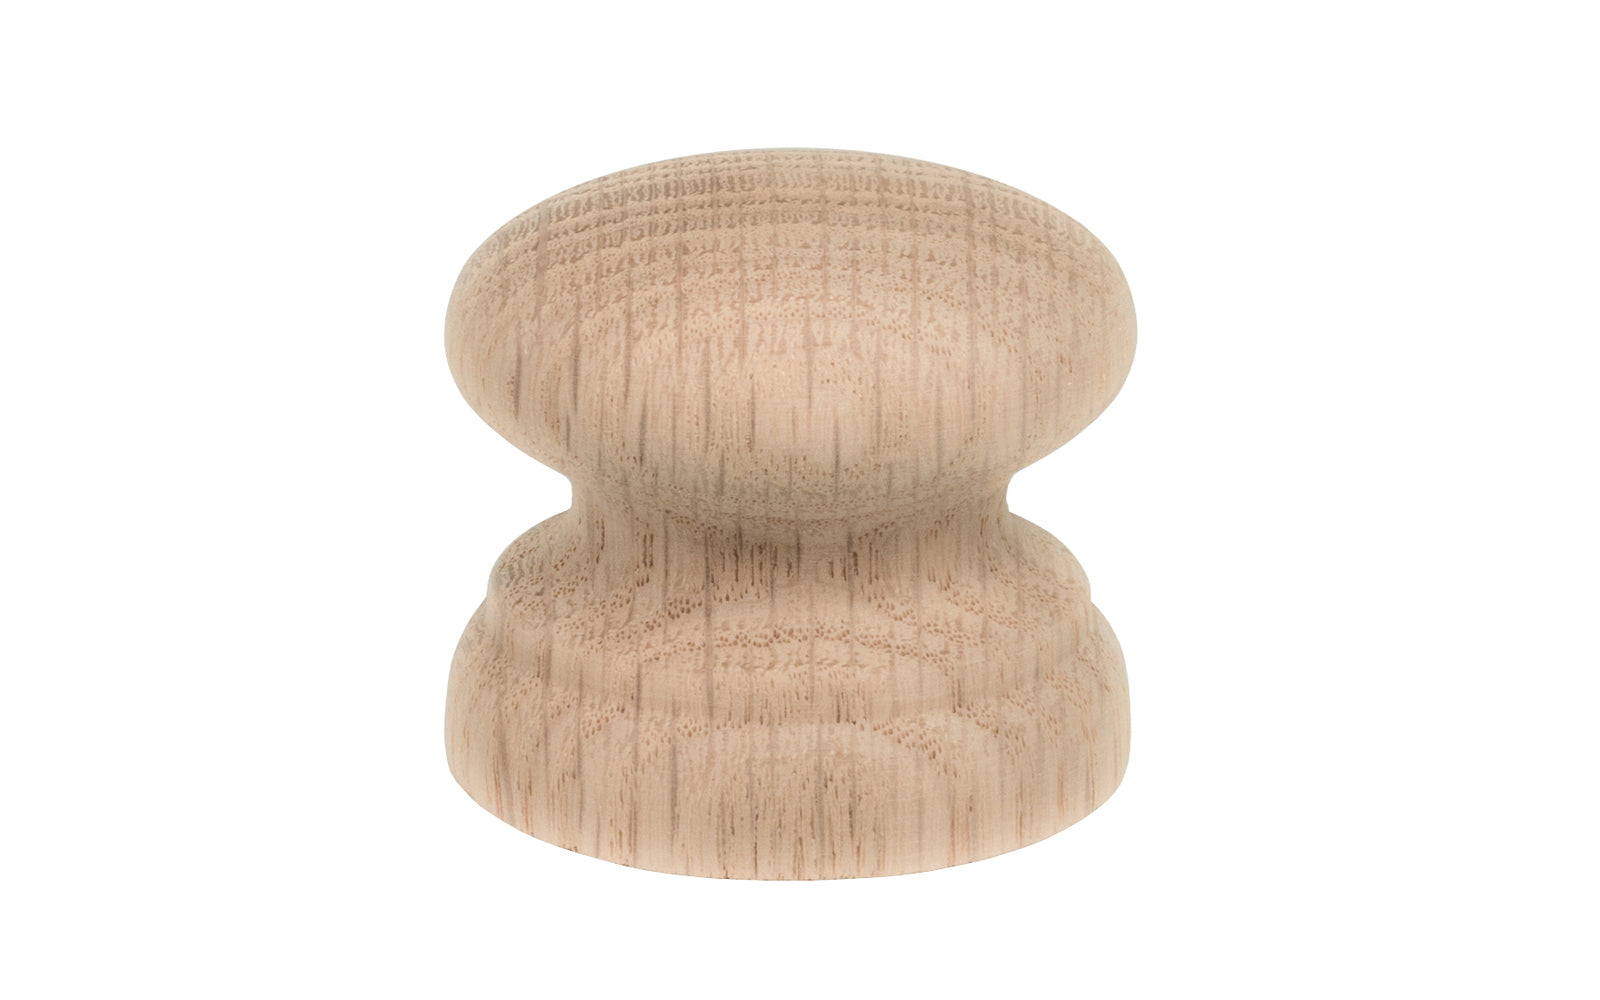 A classic and traditional oak wood round cabinet knob with a large pedestal shaped base. Made of unfinished oak wood. These knobs may be stained, painted, or varnished if desired. Oak Wood Cabinet Knob with Large Base. 2" diameter knob.